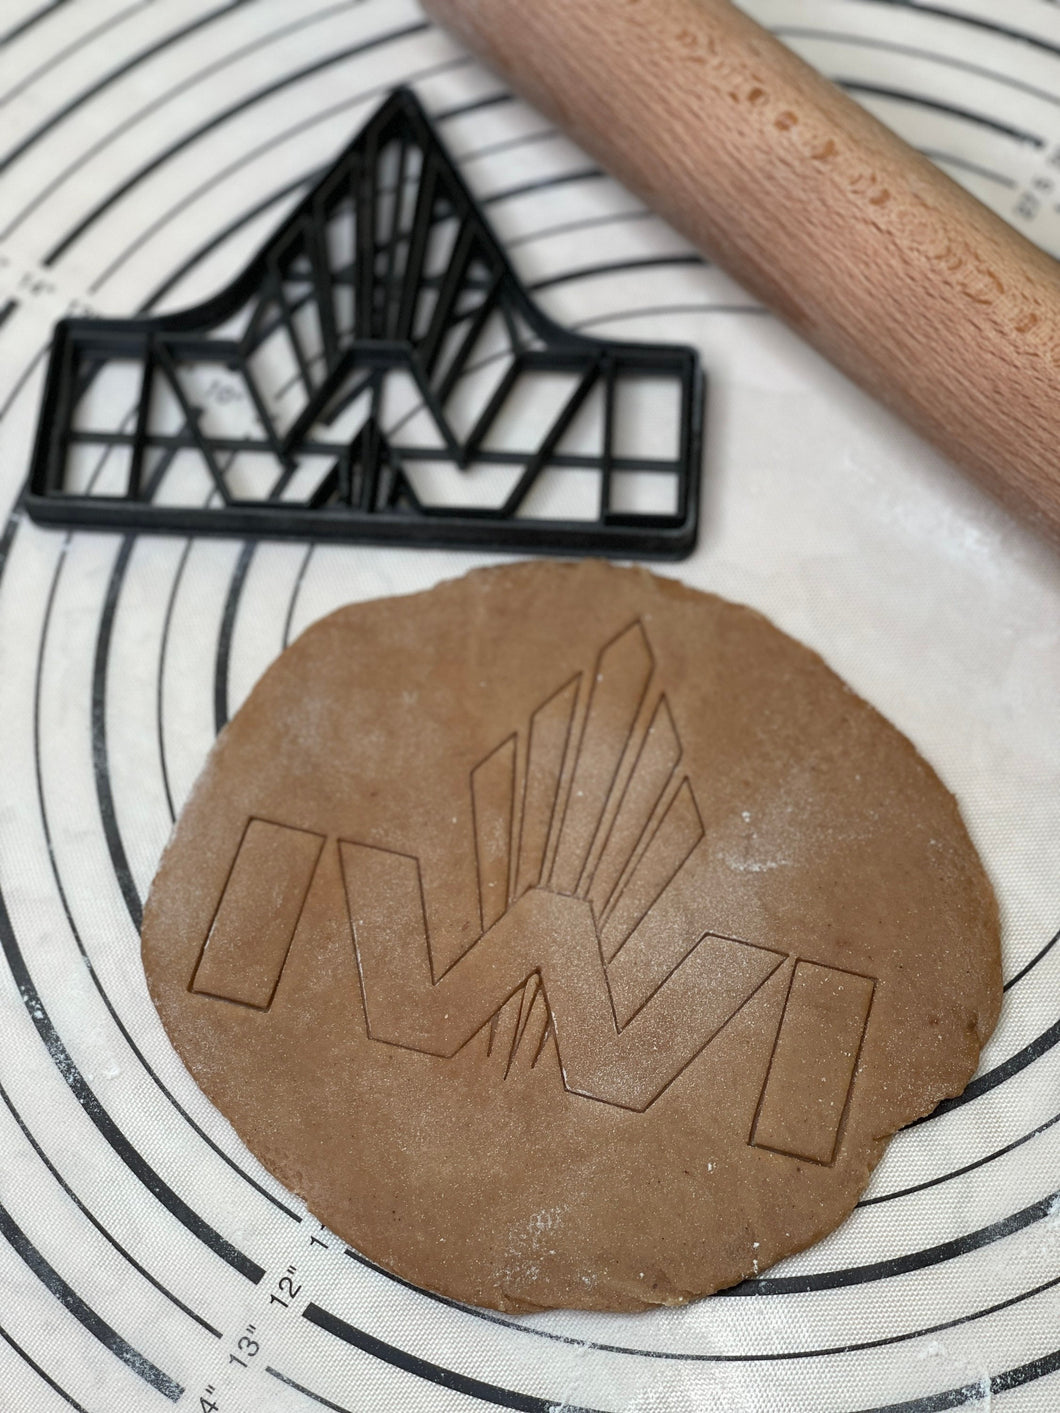 IWI Logo Cookie Cutter & Mold 4.5” Produced by 3D Kitchen Art